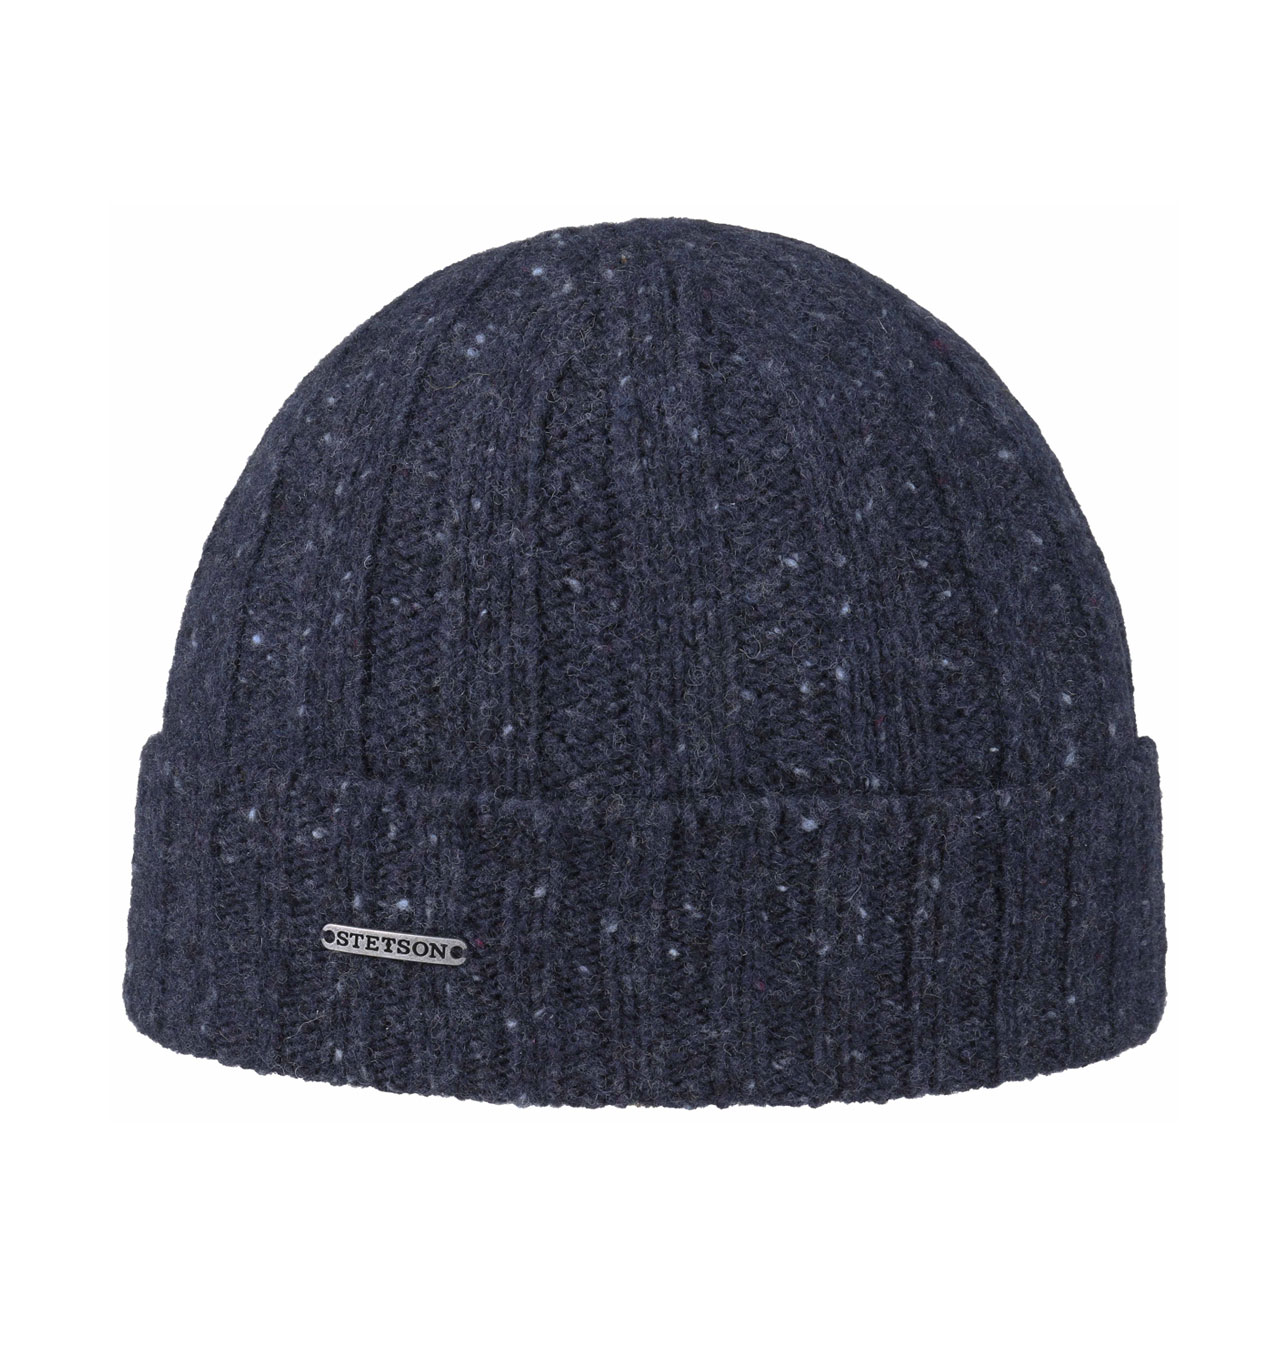 Stetson - Wisconsin Donegal Knit Beanie - Navy